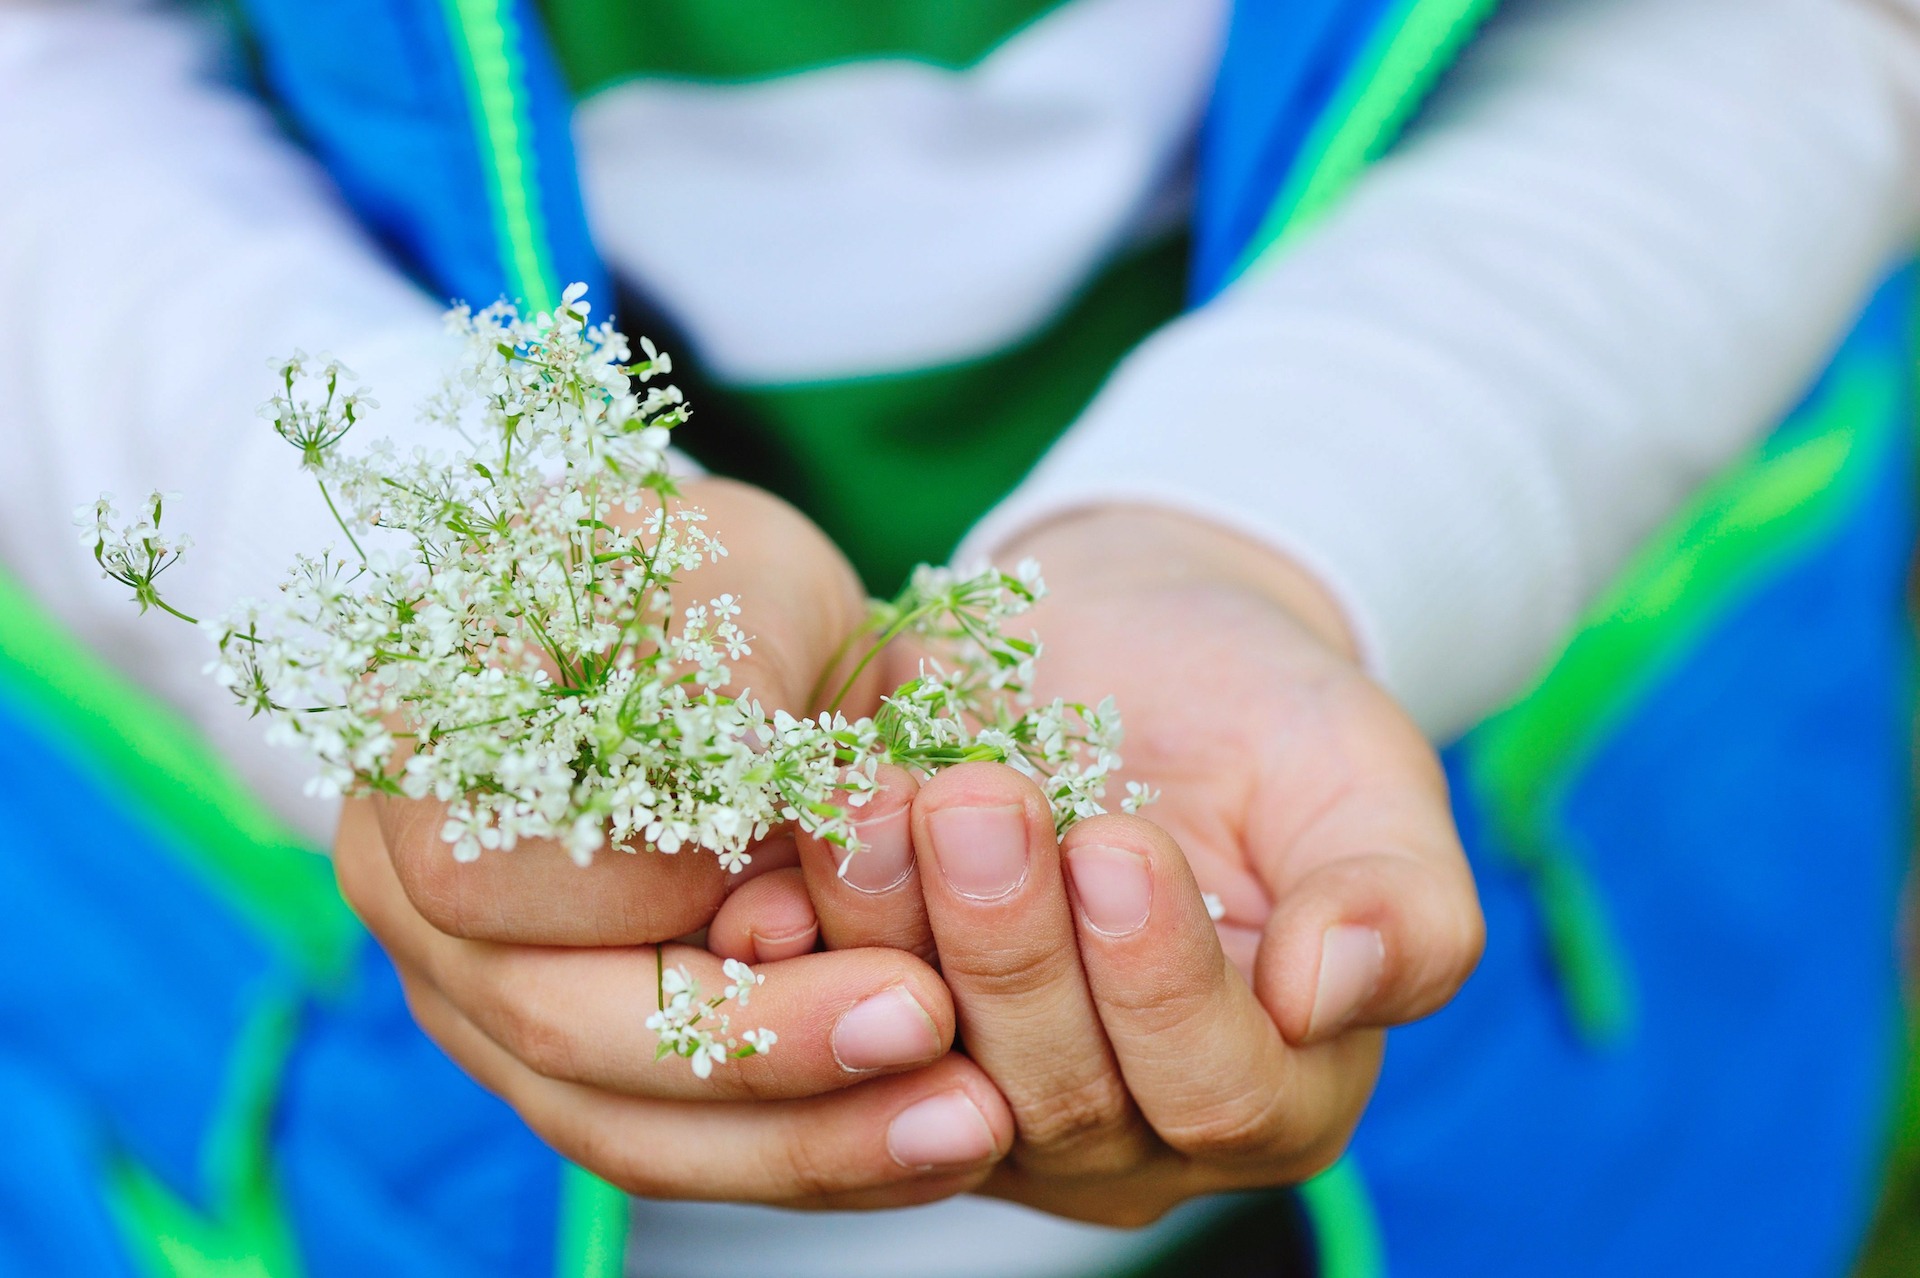 Small white flowers in children's hands